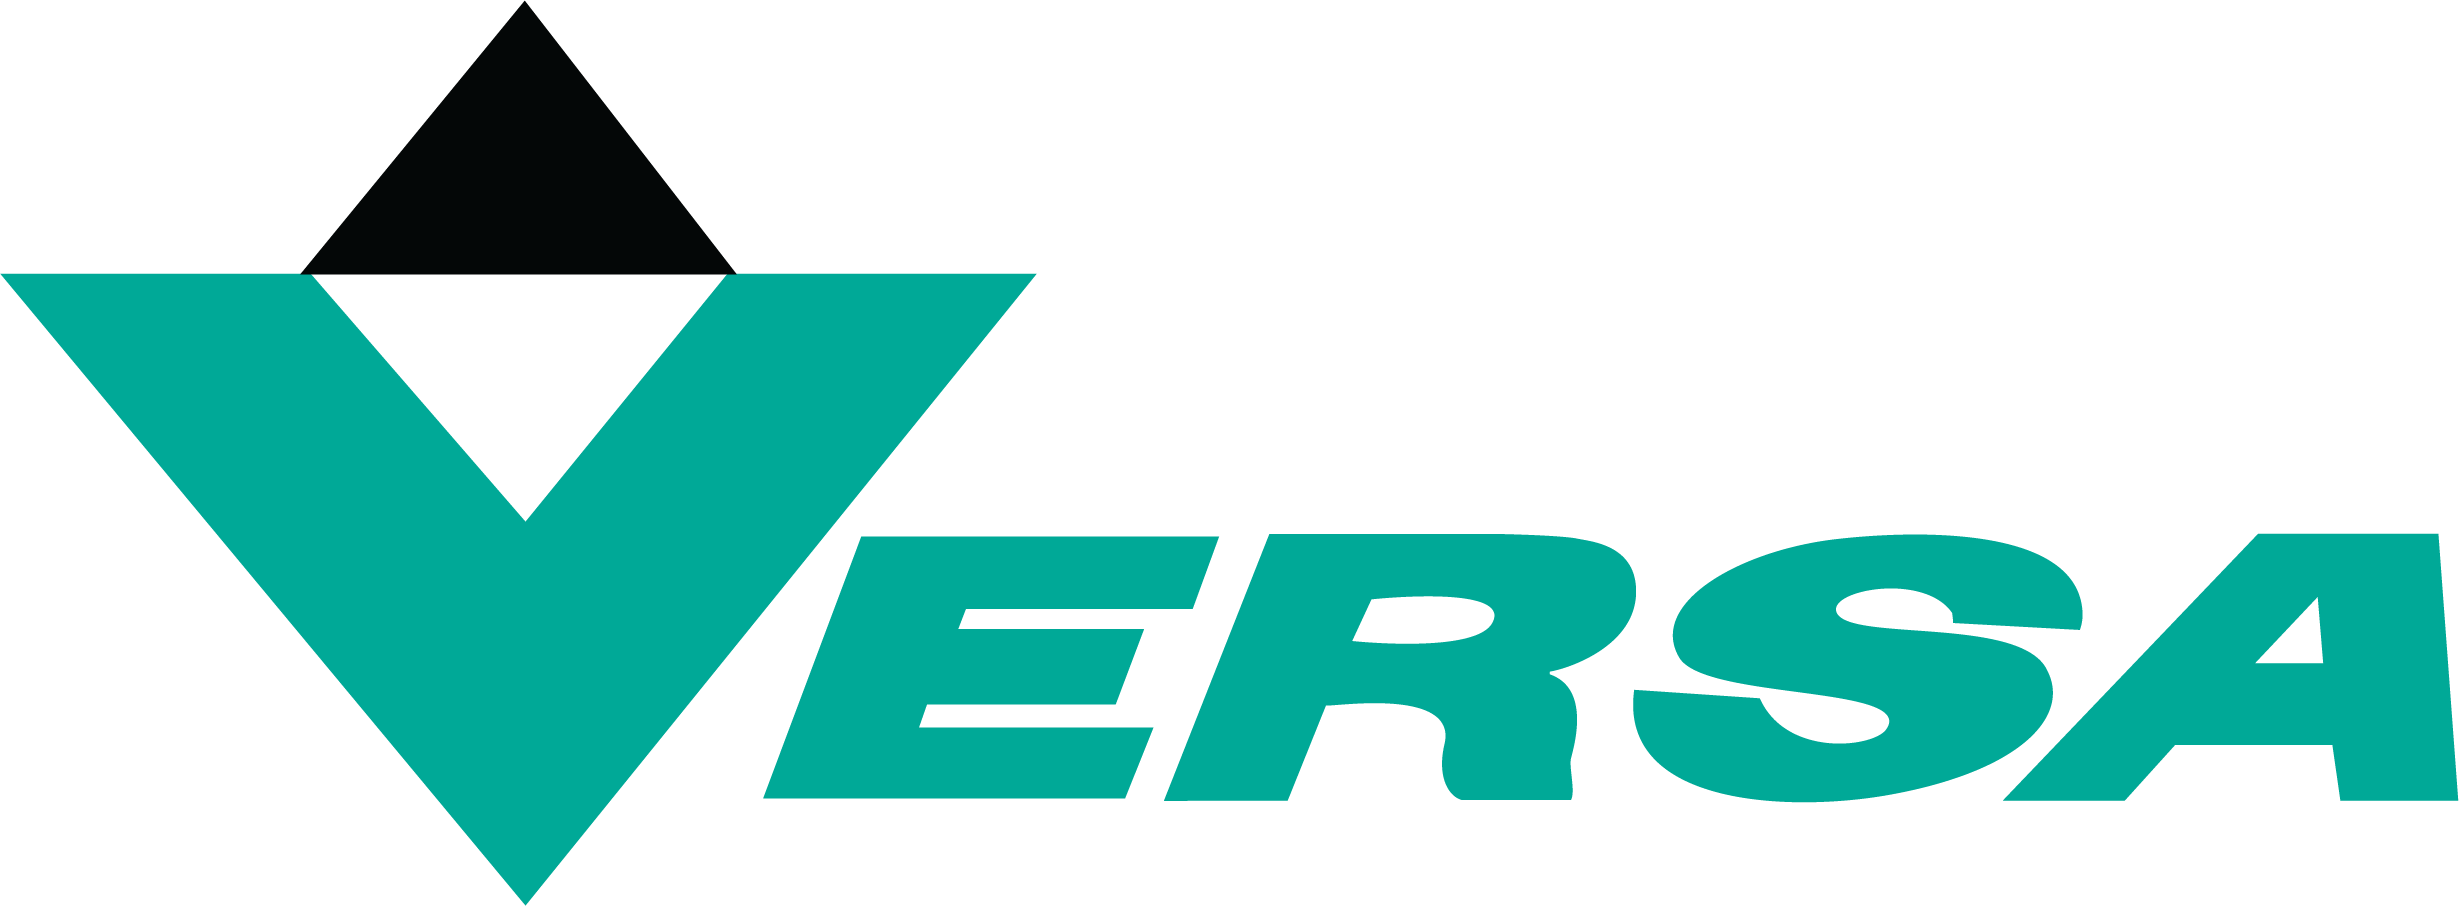 Versa Products Co., Inc.